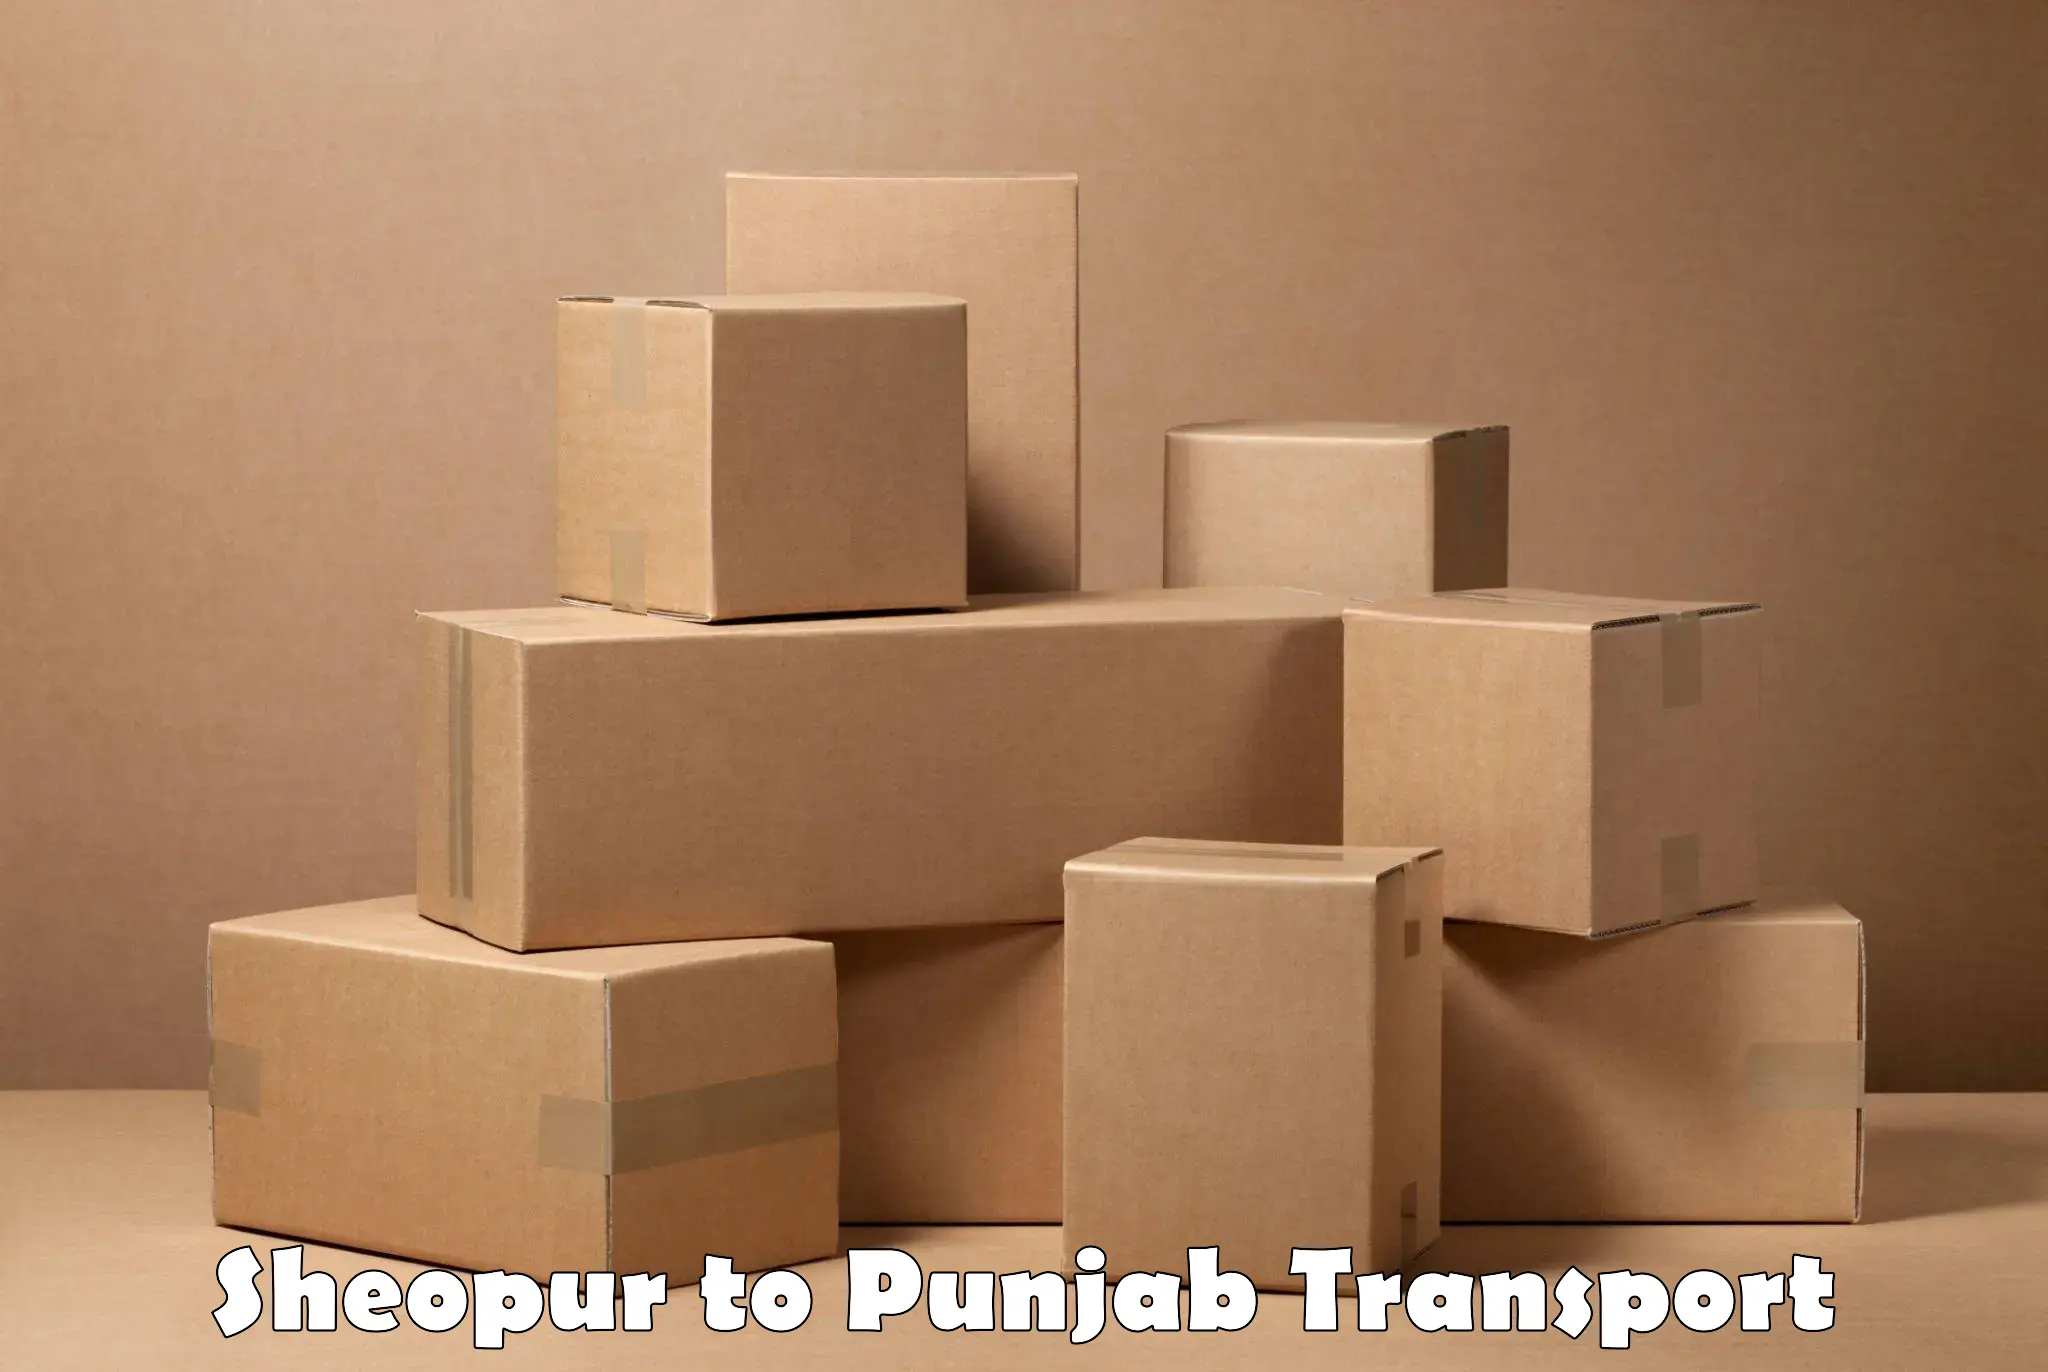 Commercial transport service Sheopur to Malout